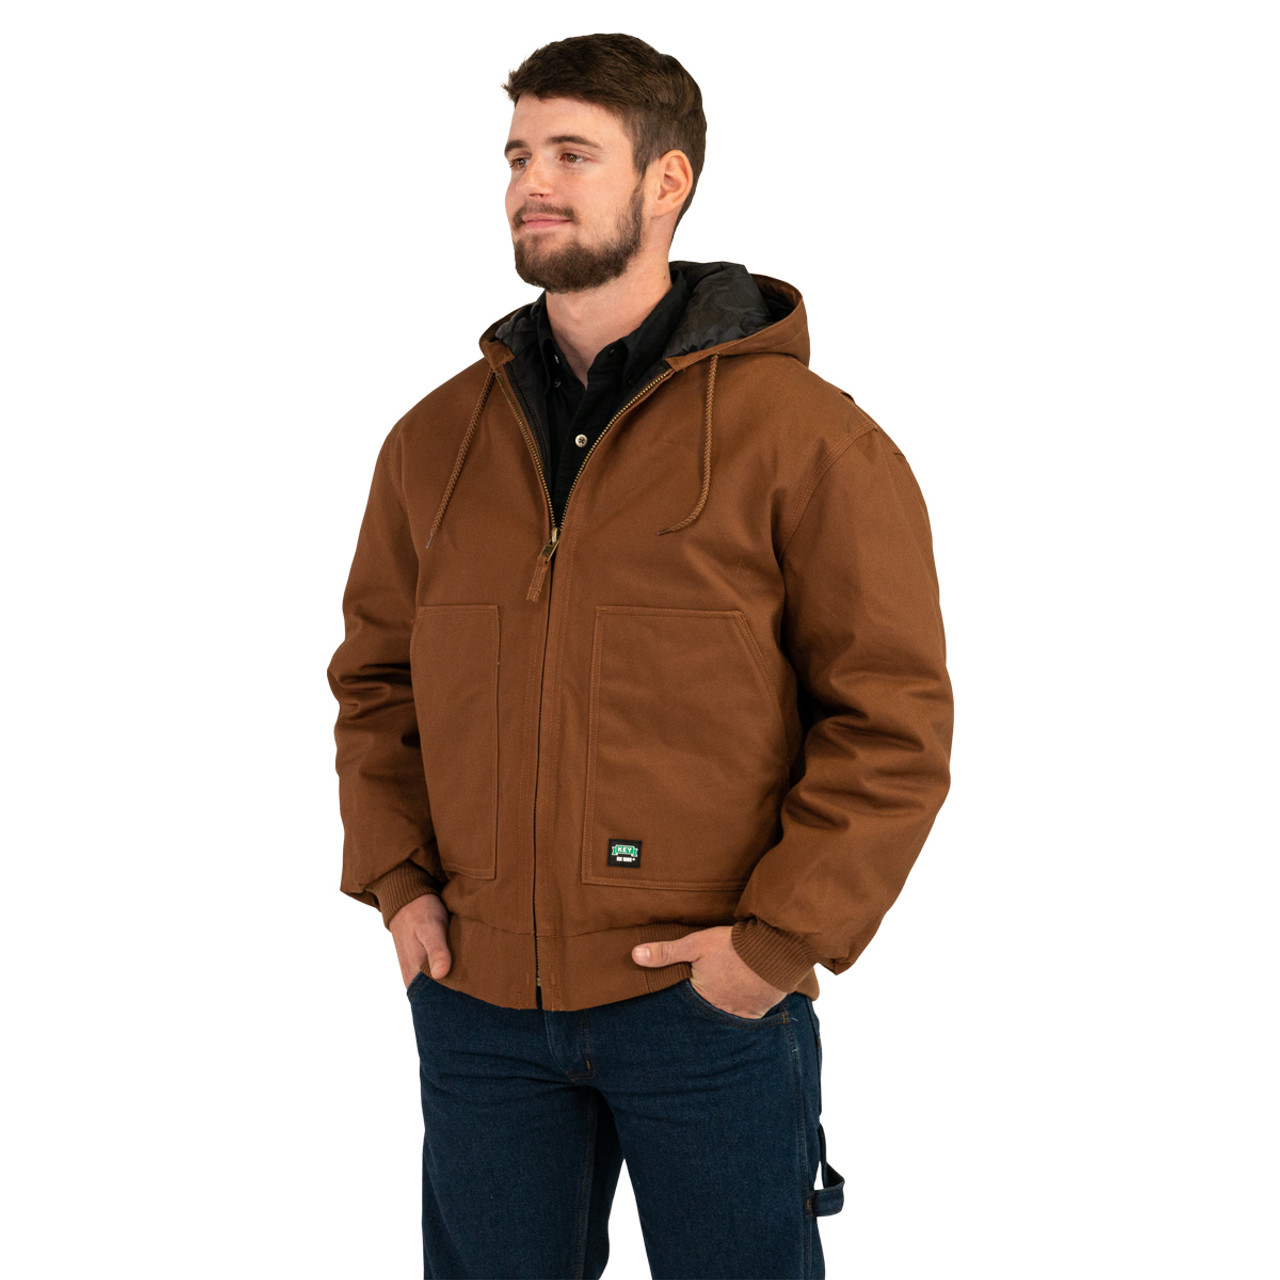 KEY Insulated Duck Hooded Work Jacket for Men